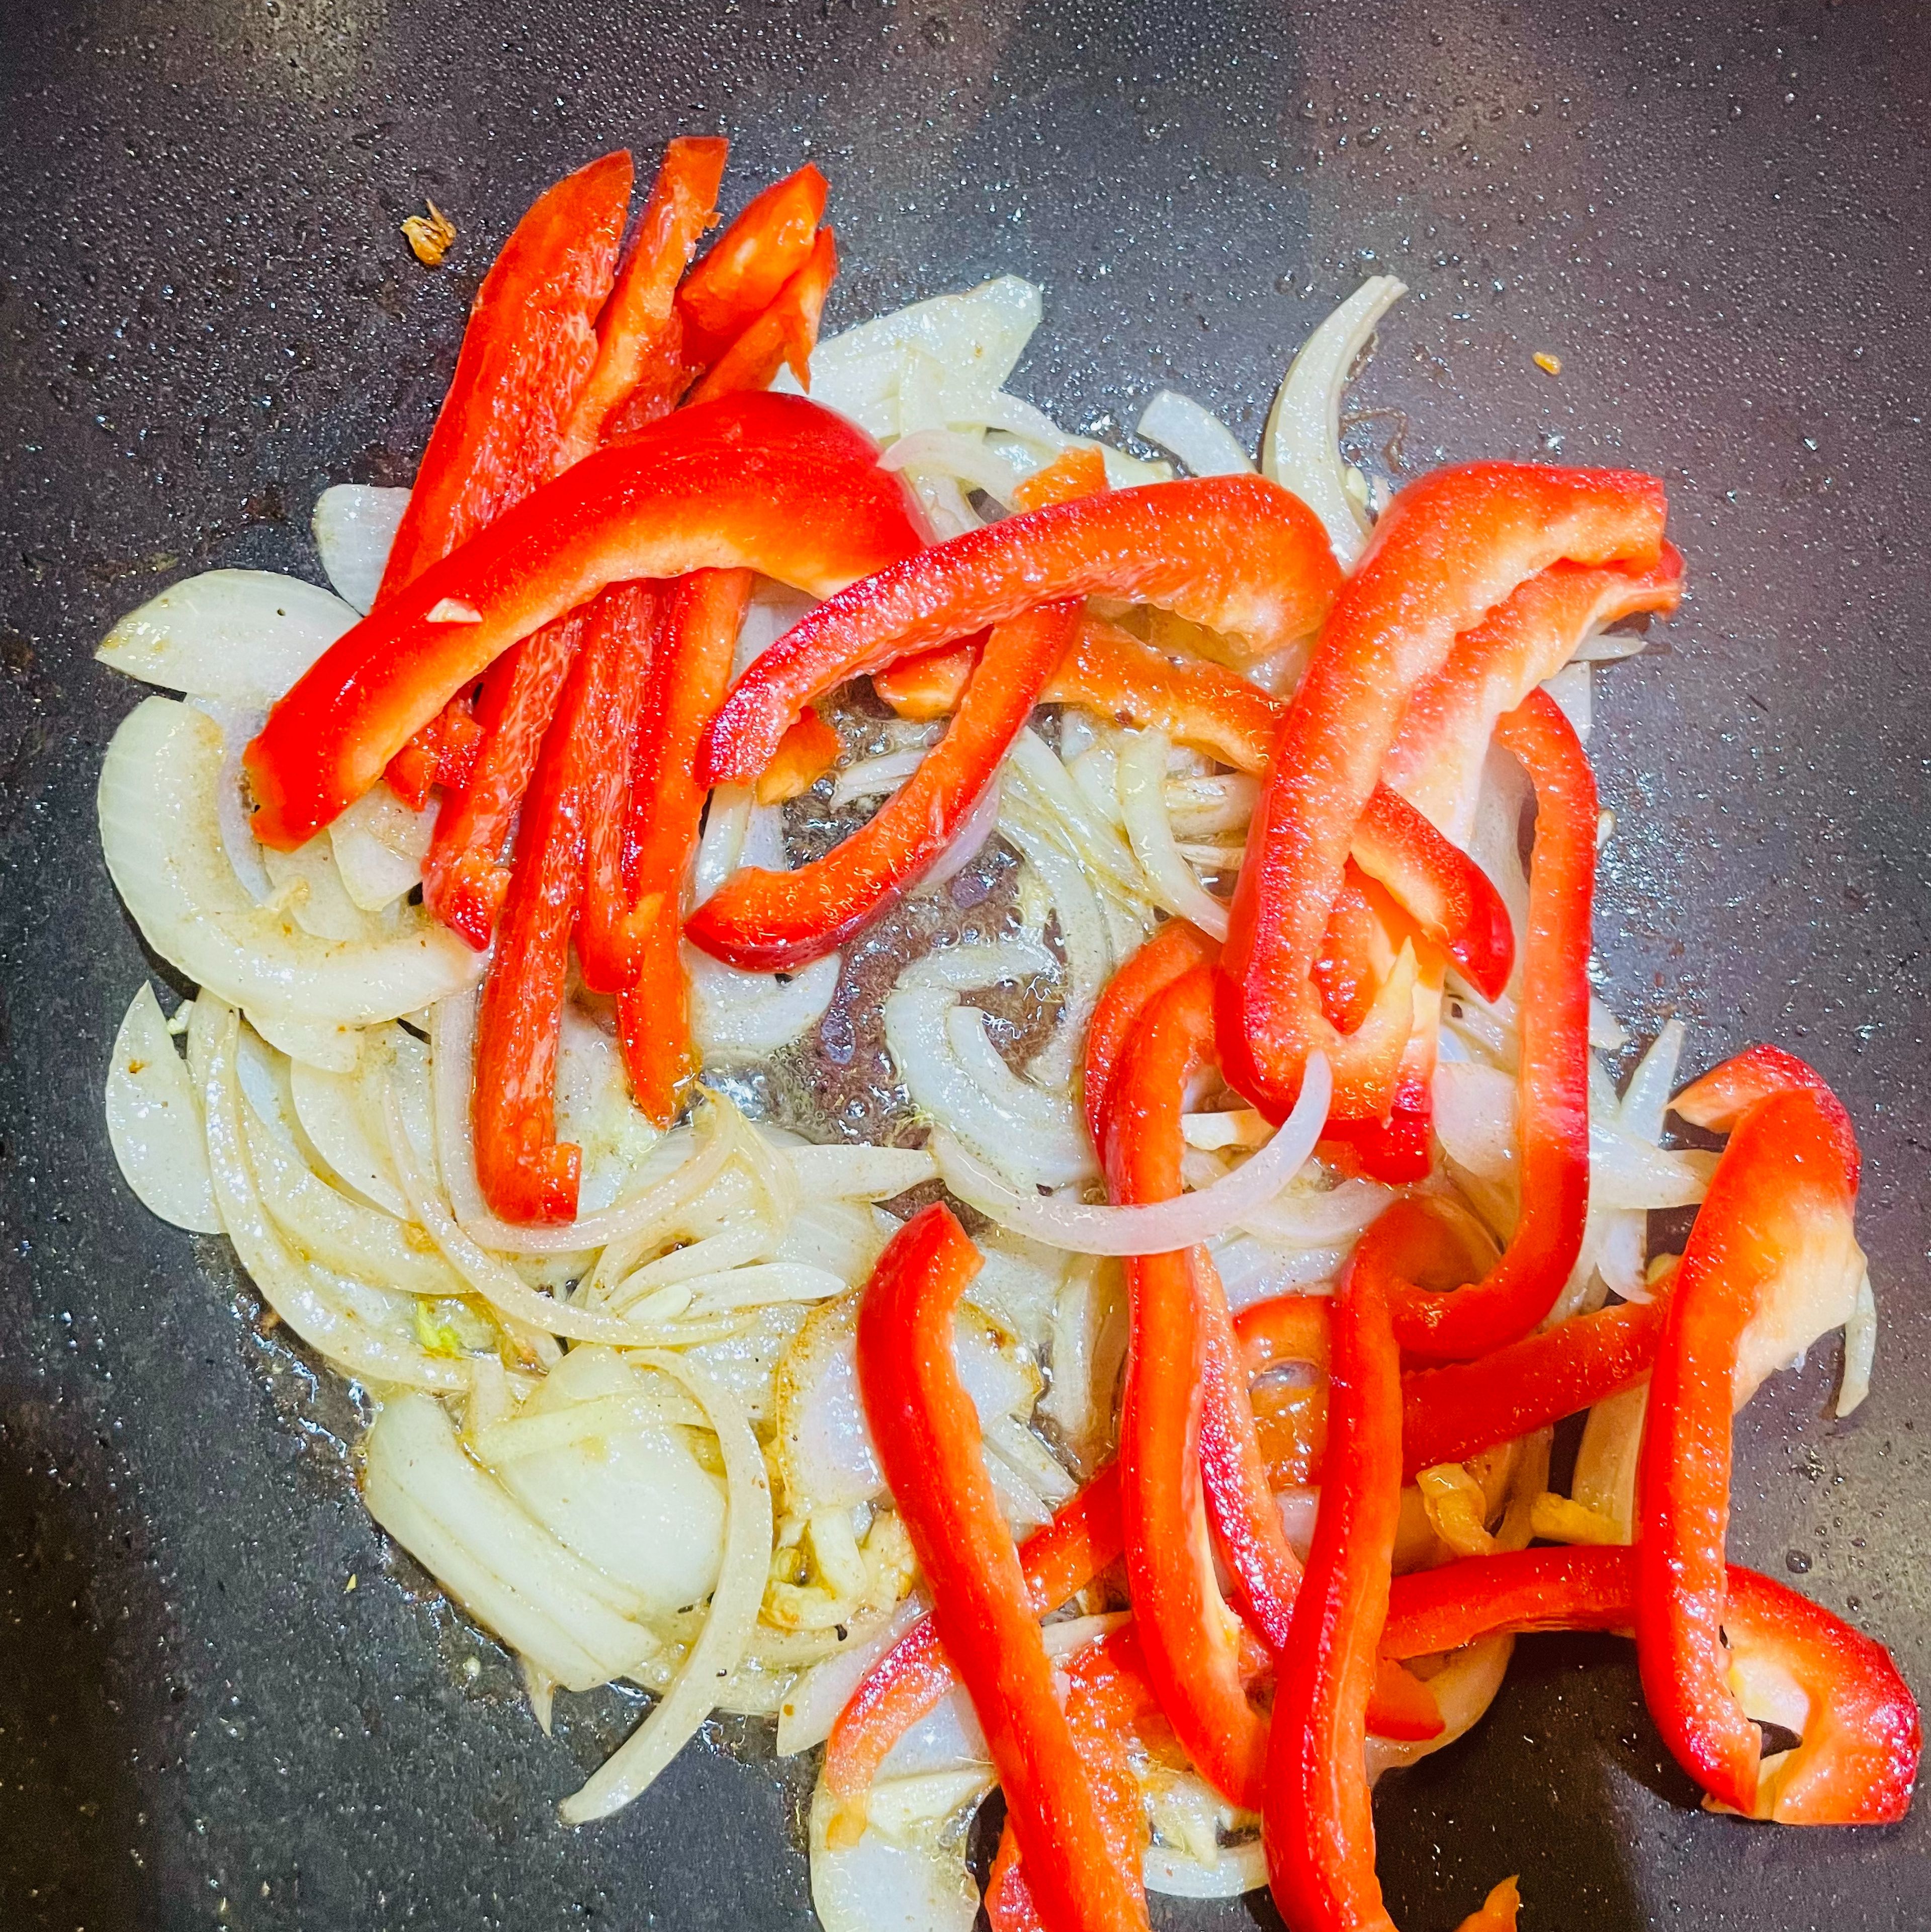 Remove chicken, set aside. In the same pan, add 2 tbsp olive oil, onion, garlic, and red bell pepper until softened